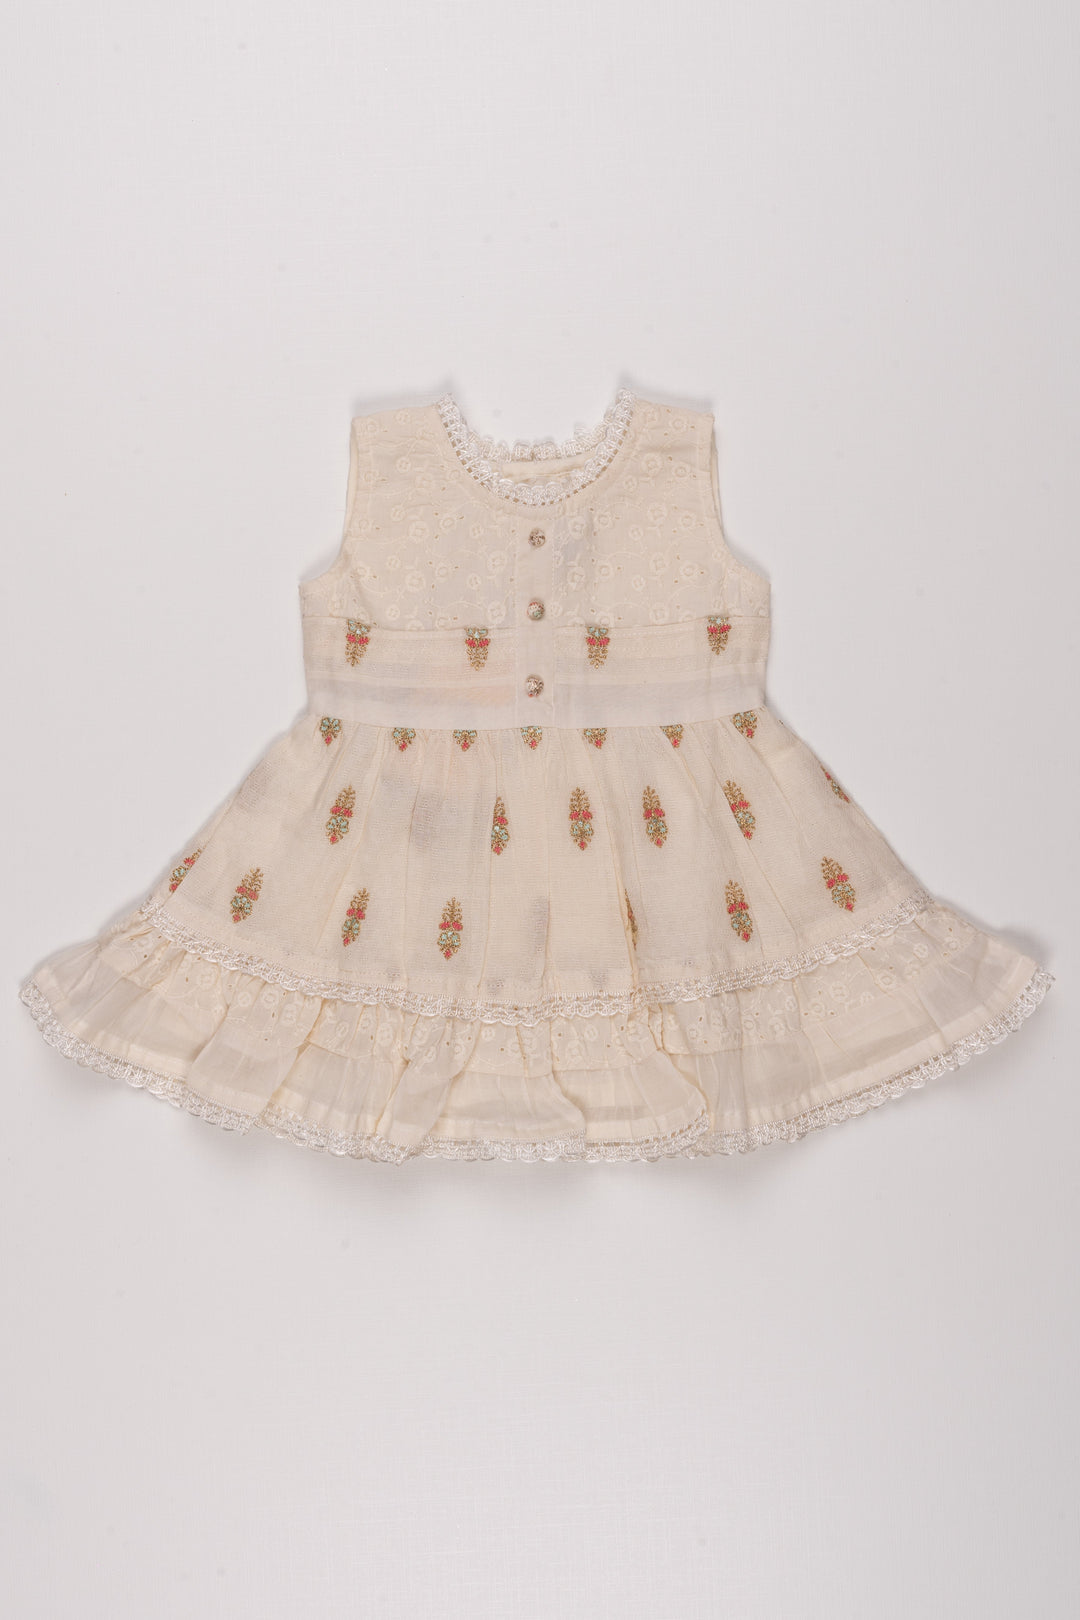 The Nesavu Baby Cotton Frocks Elegant Whimsy: Lustrous Floral Zari Embroidered Cotton Baby Frock in Sublime Half White Nesavu 14 (6M) / Half white / Cotton BFJ472A-14 Trendy baby frock designs | Eco-friendly baby dresses | The Nesavu